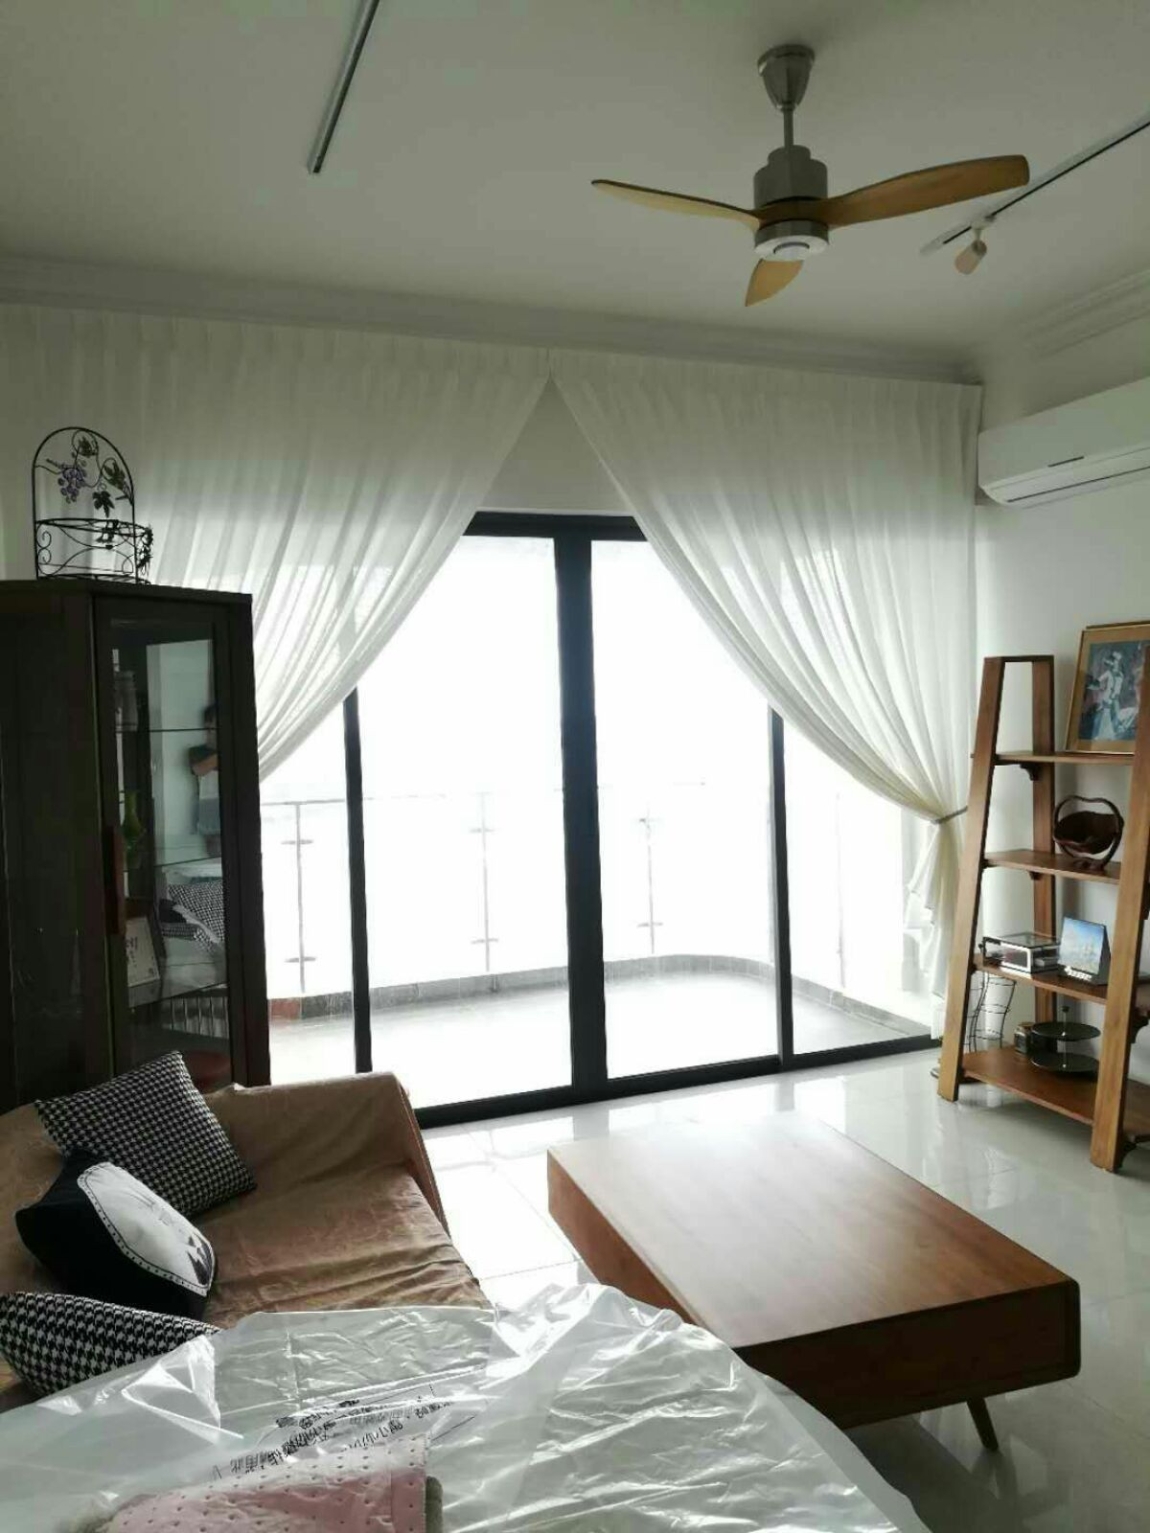 Curtain Design Refer In Johor Bahru Commonly High Style Curtain & Blinds Malaysia Reference Renovation Design 